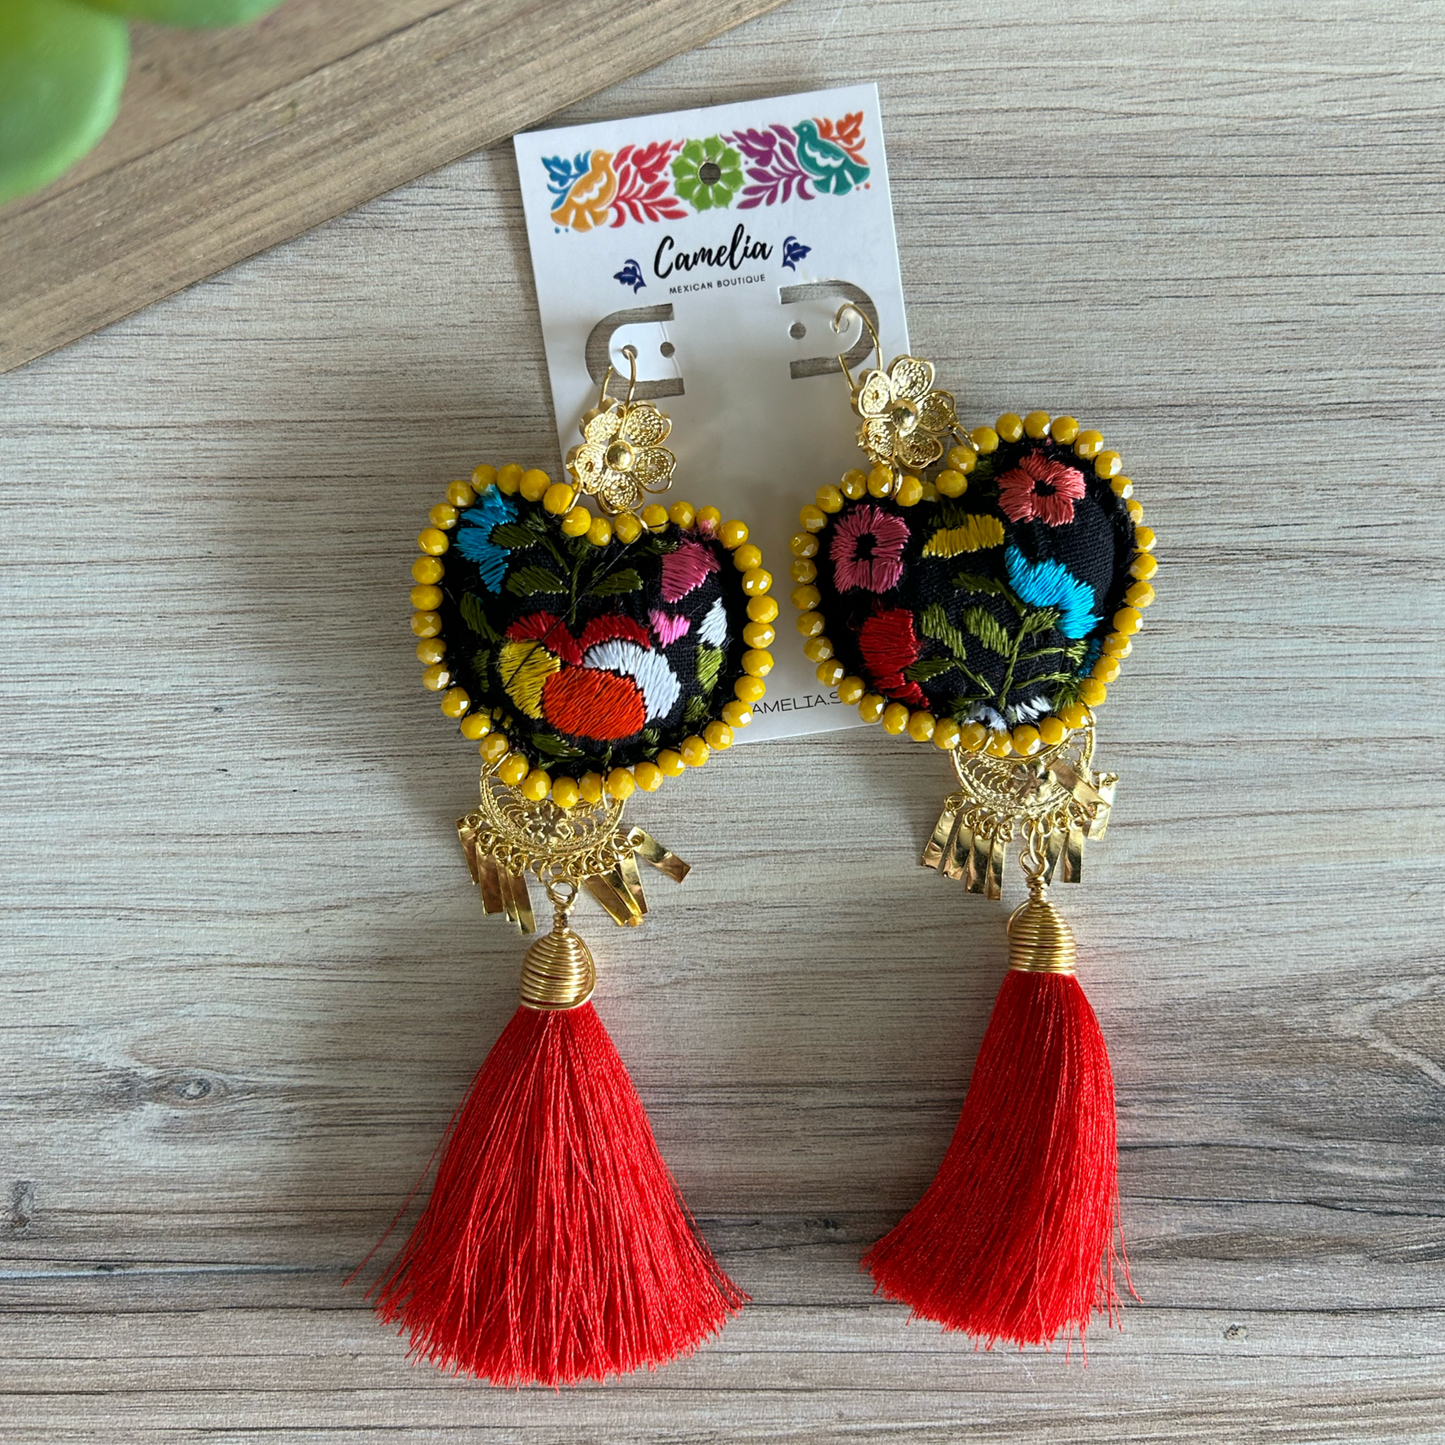 San Antonino Mexican Embroidered Heart Earrings - Red